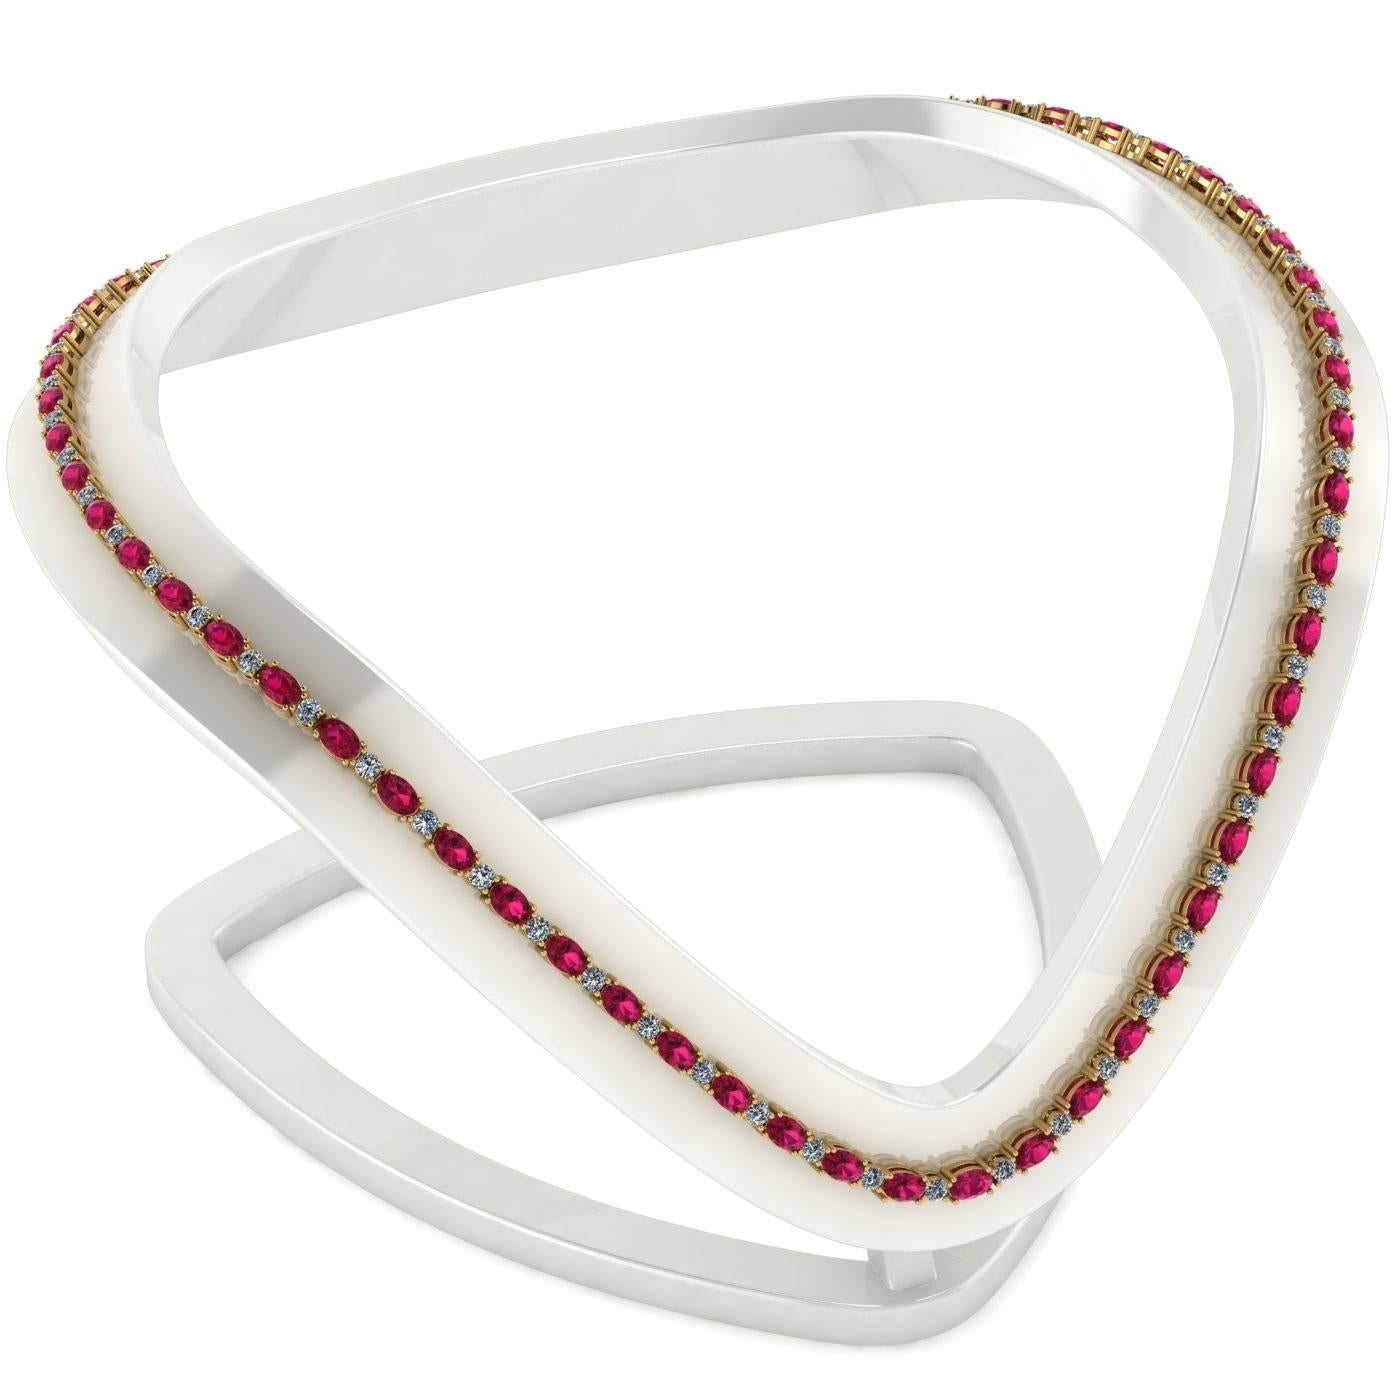 INTRODUCING OUR STUNNING RUBY AND DIAMOND TENNIS NECKLACE

Beautiful and precious! Passionate ruby is a sacred gem of the sun. It is symbolizing love, confidence and status. Discover the natural beauty of this mysterious gemstone with our chic and